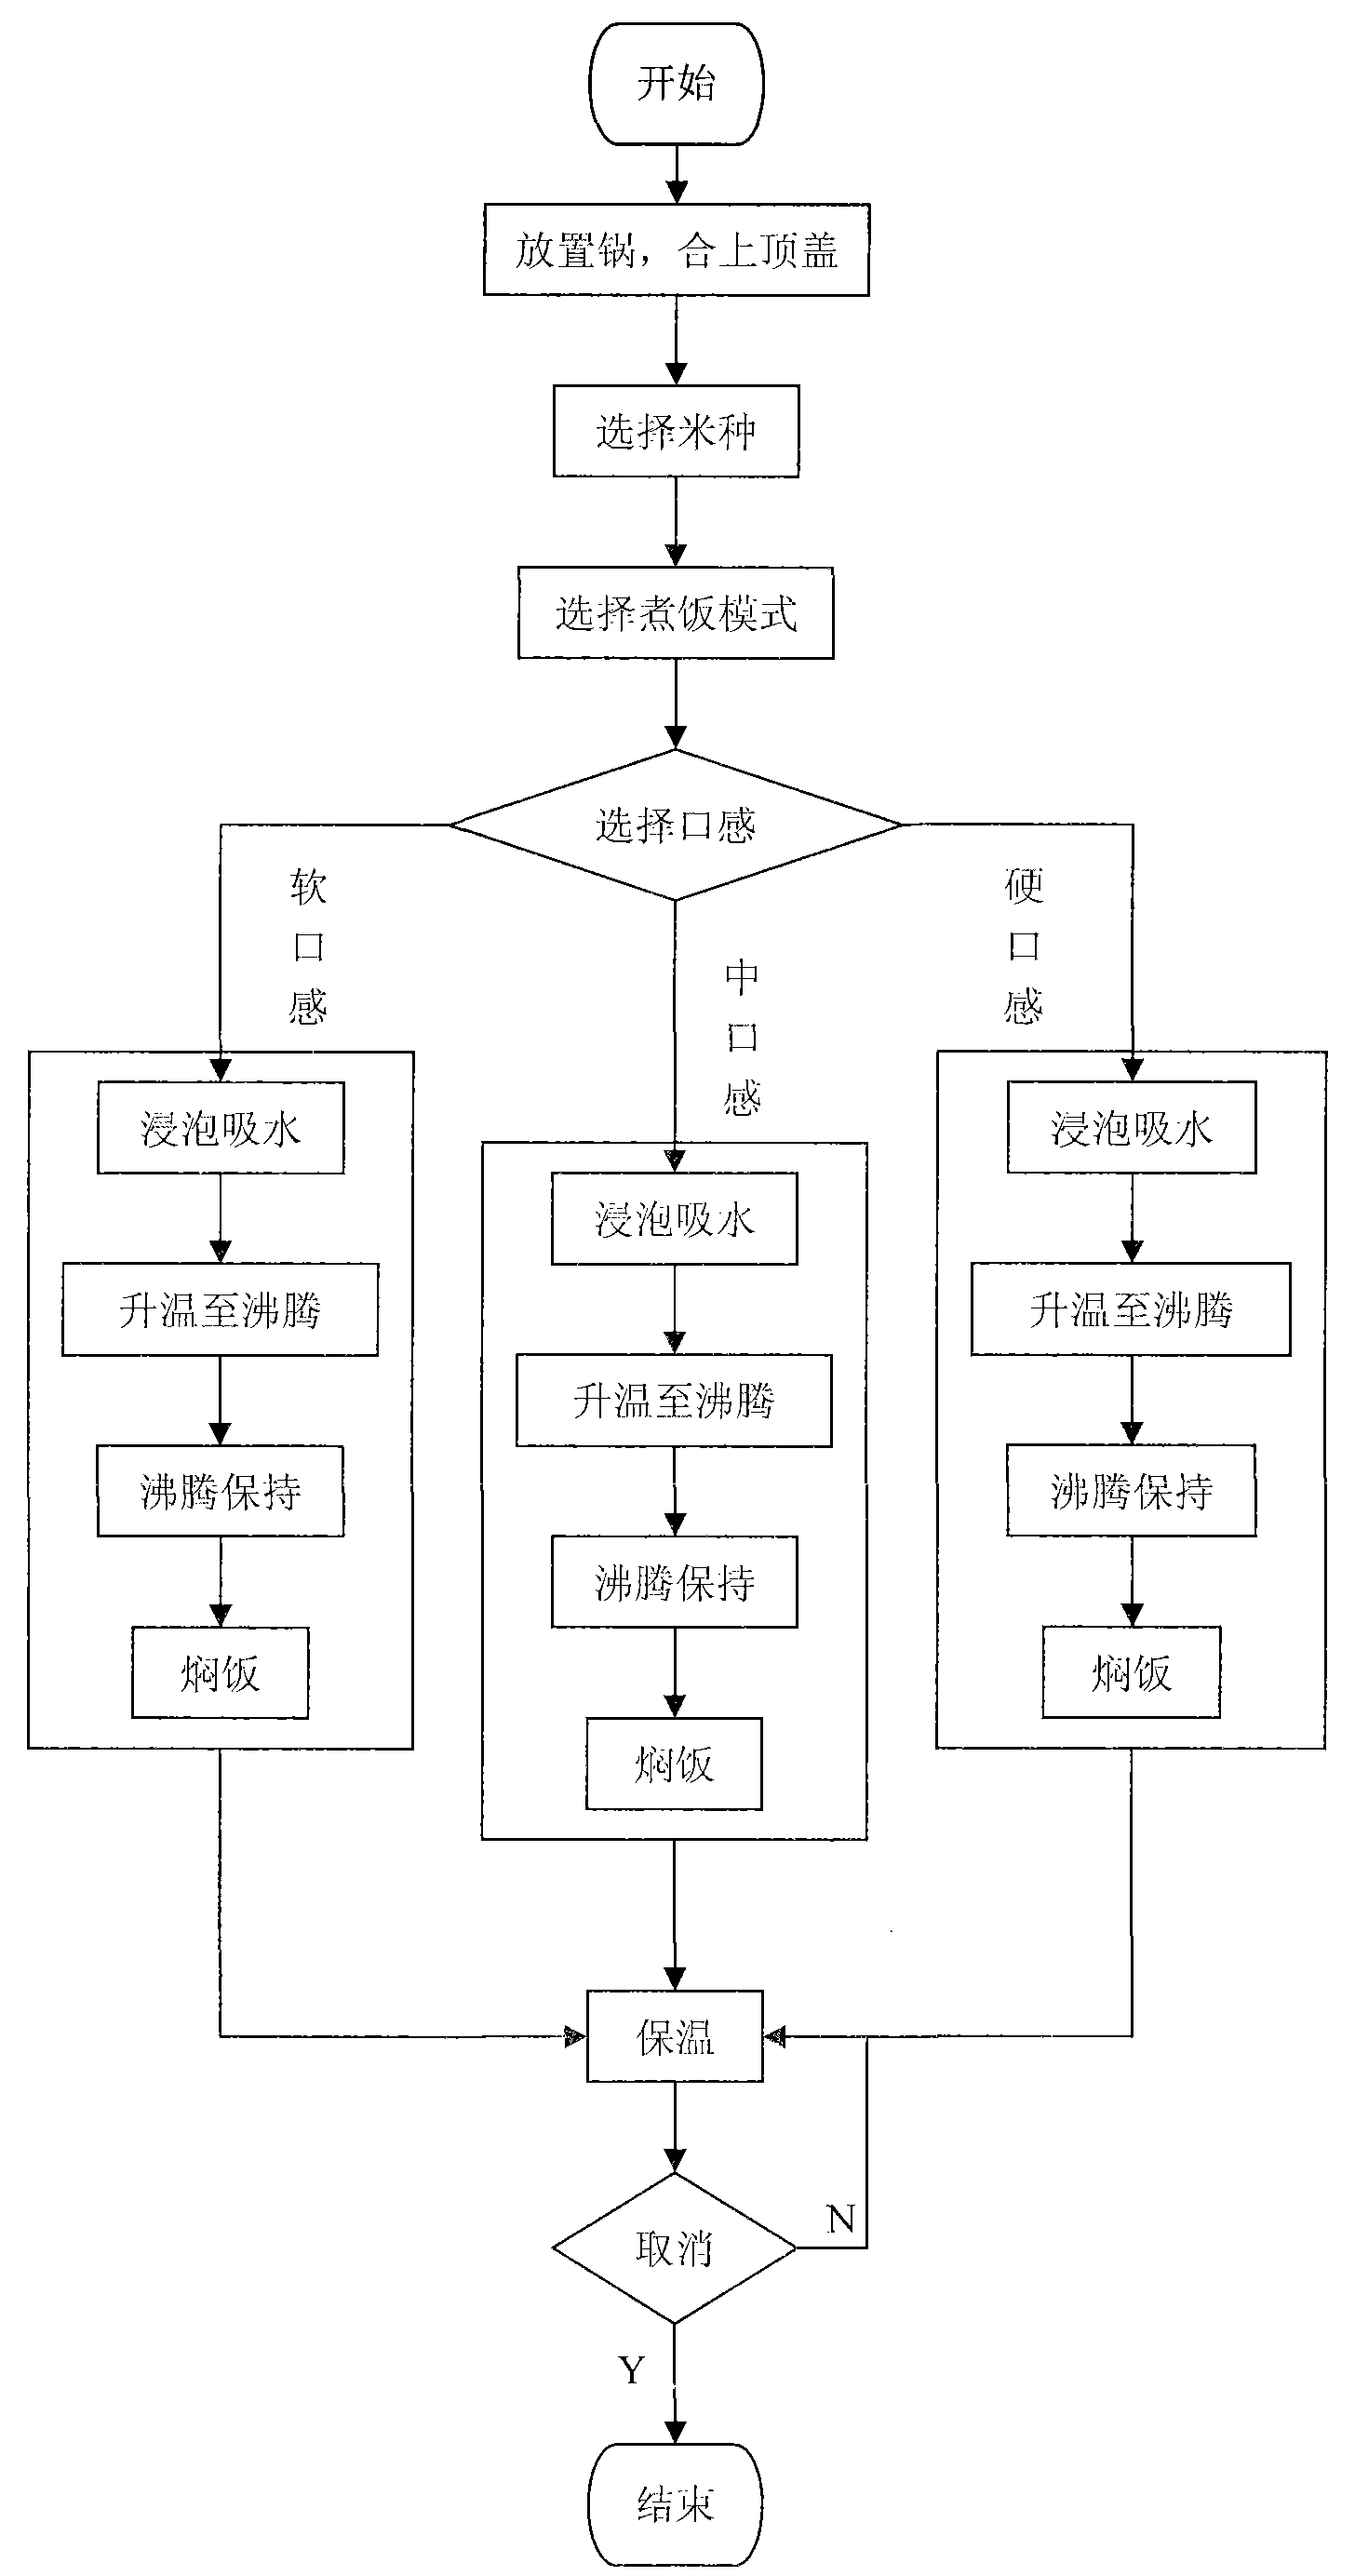 Method for controlling rice steaming and boiling of electric rice cooker